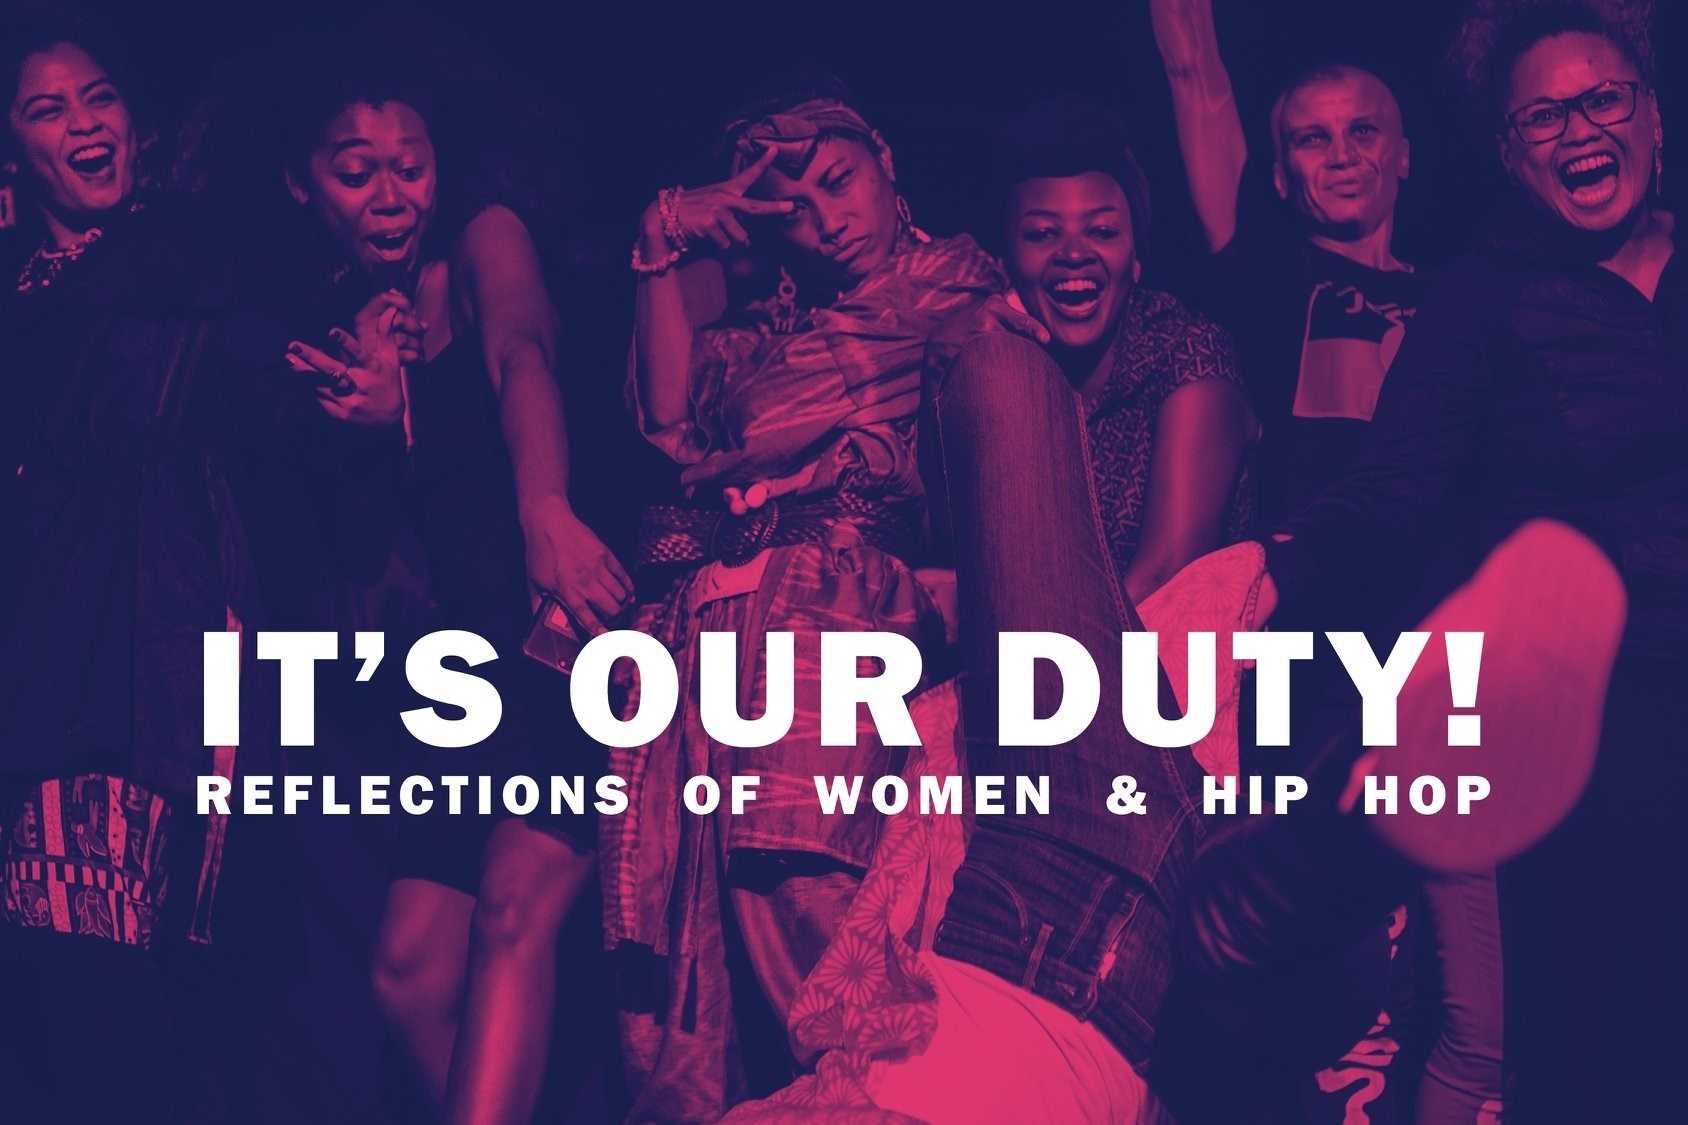 It's our duty! Reflections of women & hip hop - Purple and pink image of six women of colour dancing and smiling